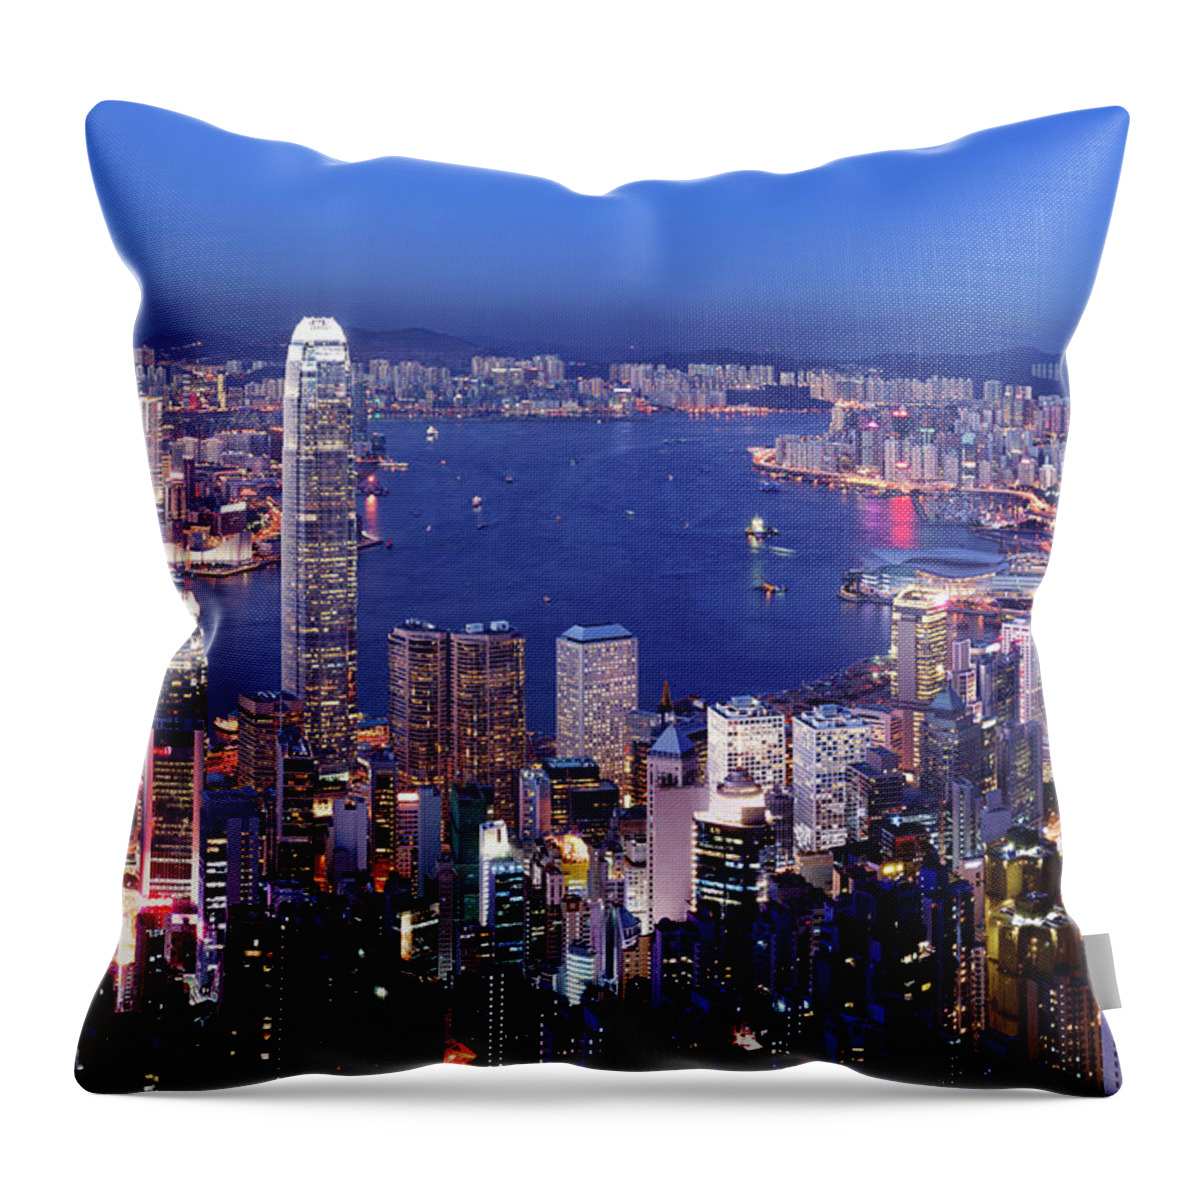 Chinese Culture Throw Pillow featuring the photograph Aerial View Of Hong Kong Victoria by Samxmeg